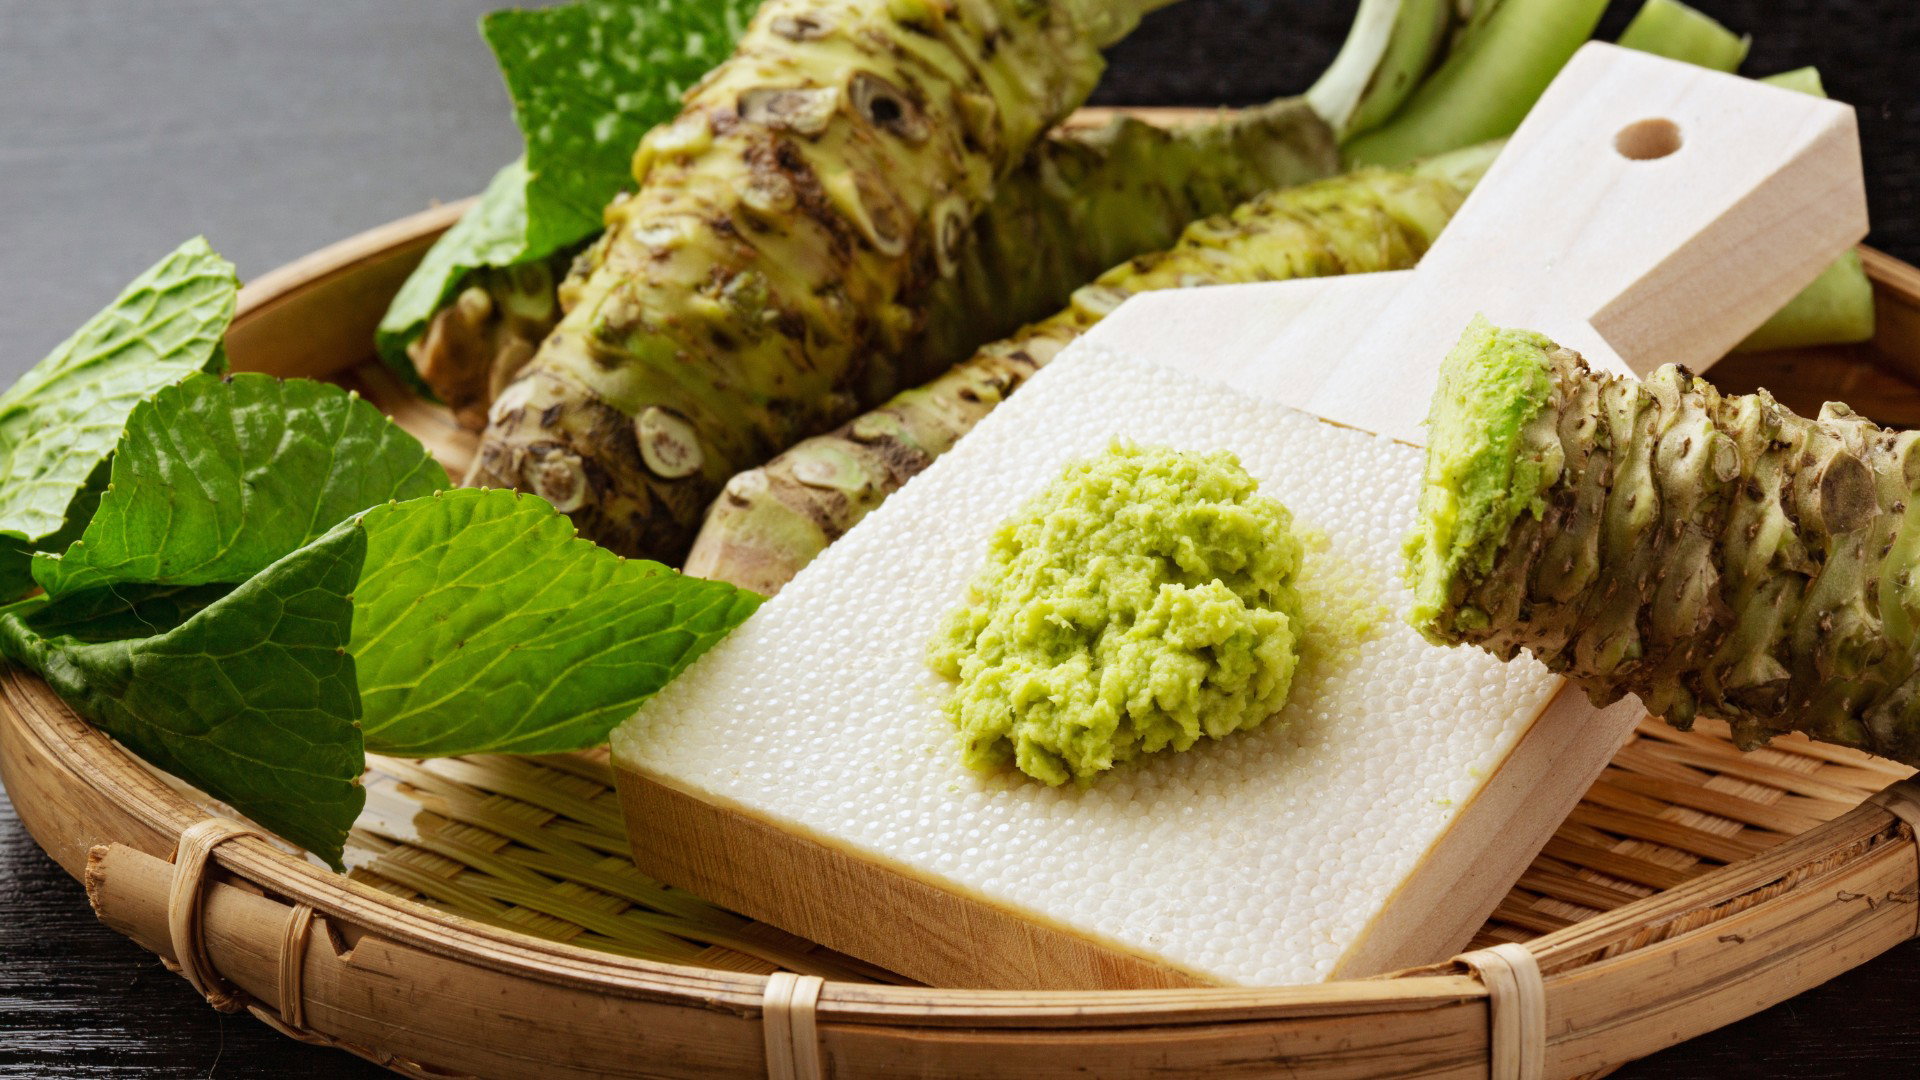 What Is Wasabi And Why Should We Eat It?